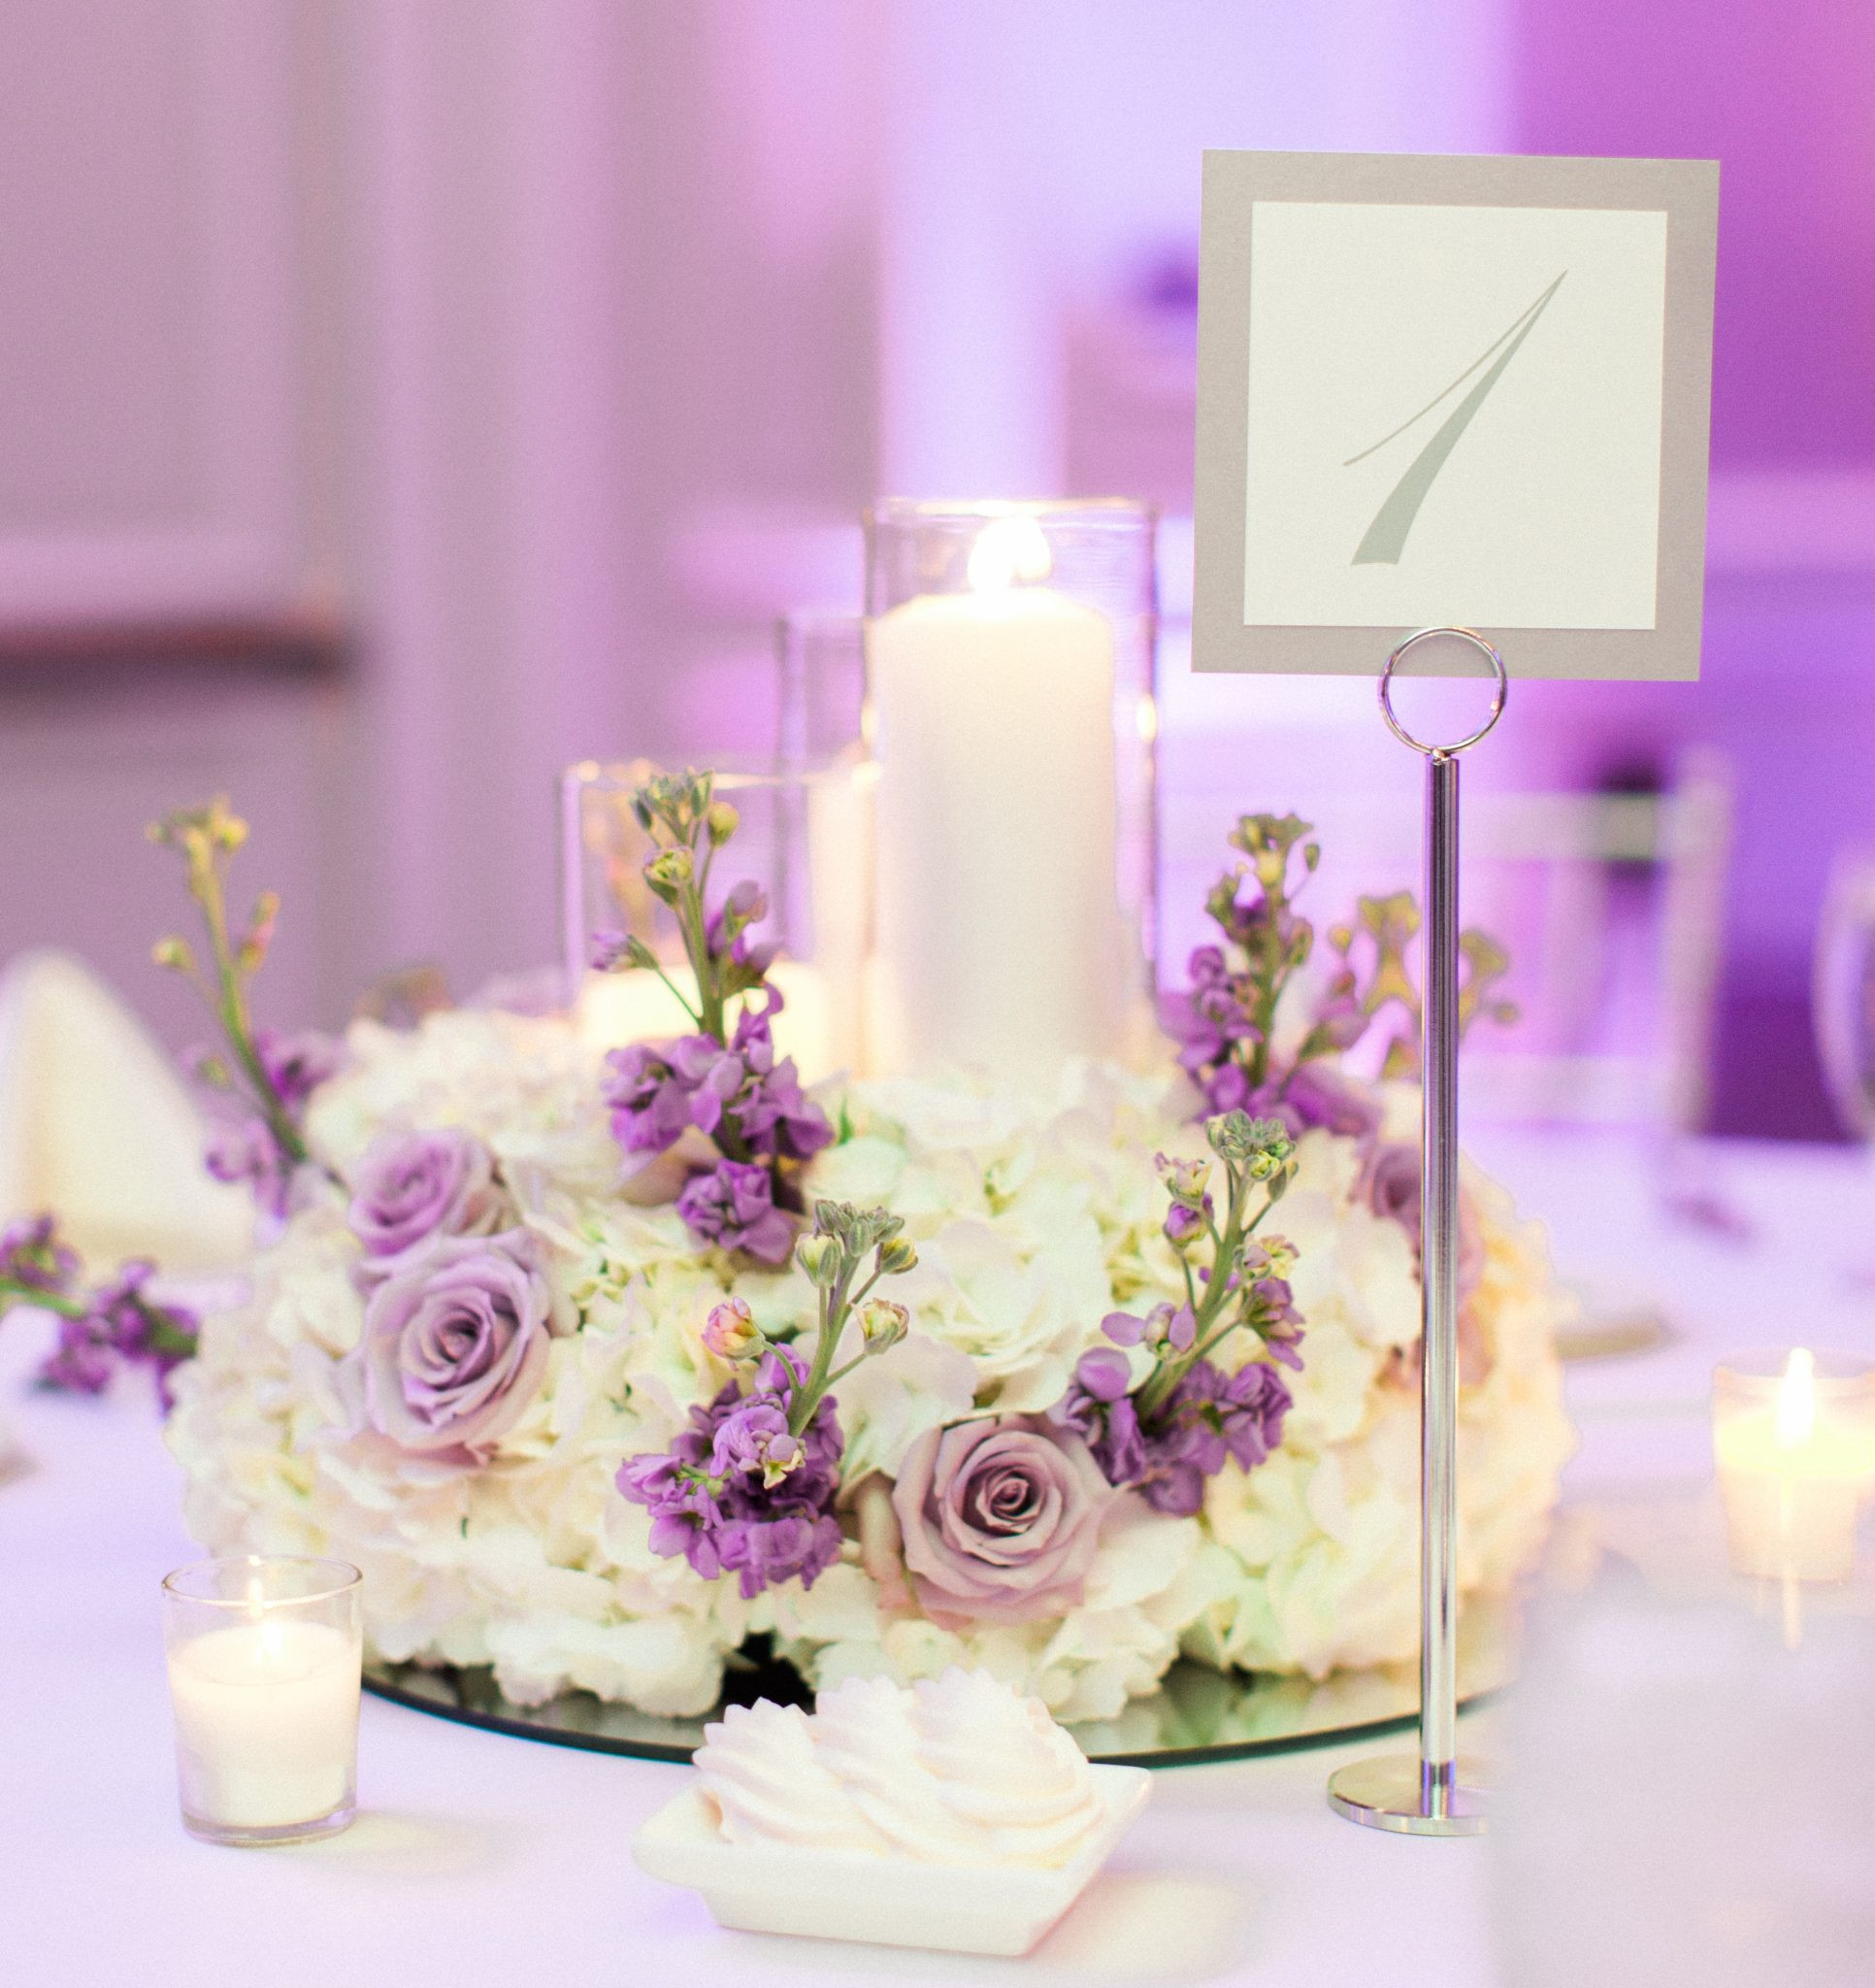 Used Wedding Reception Decorations
 Metallic Silver Wedding Table Numbers for Wedding